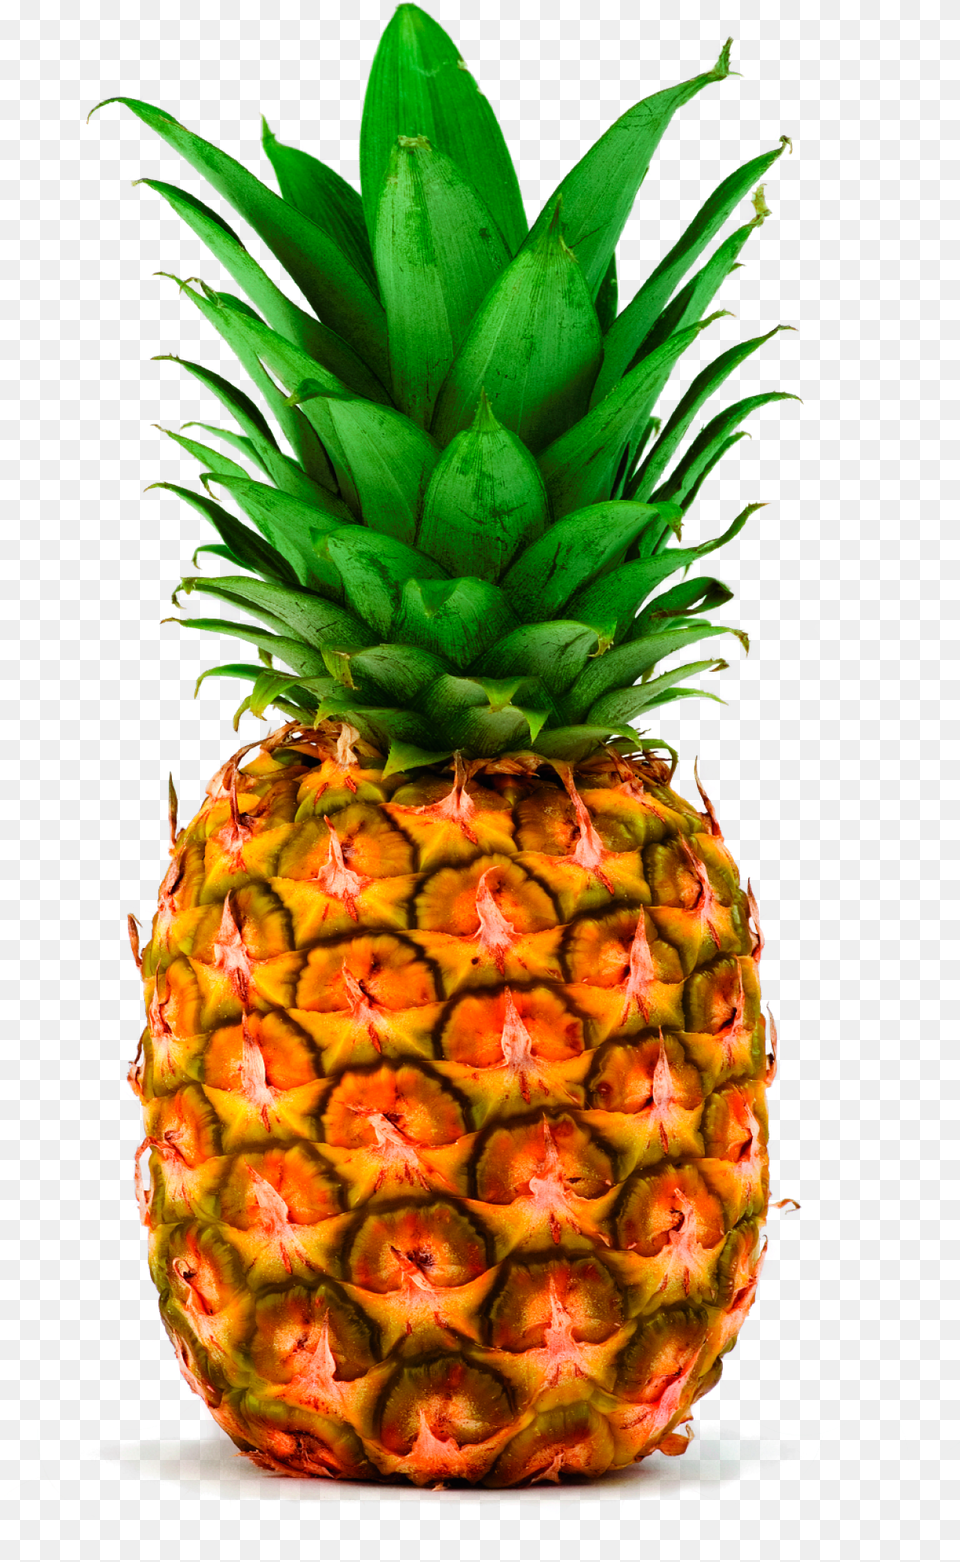 Pineapple Hd Transparent Pineapple, Food, Fruit, Plant, Produce Free Png Download